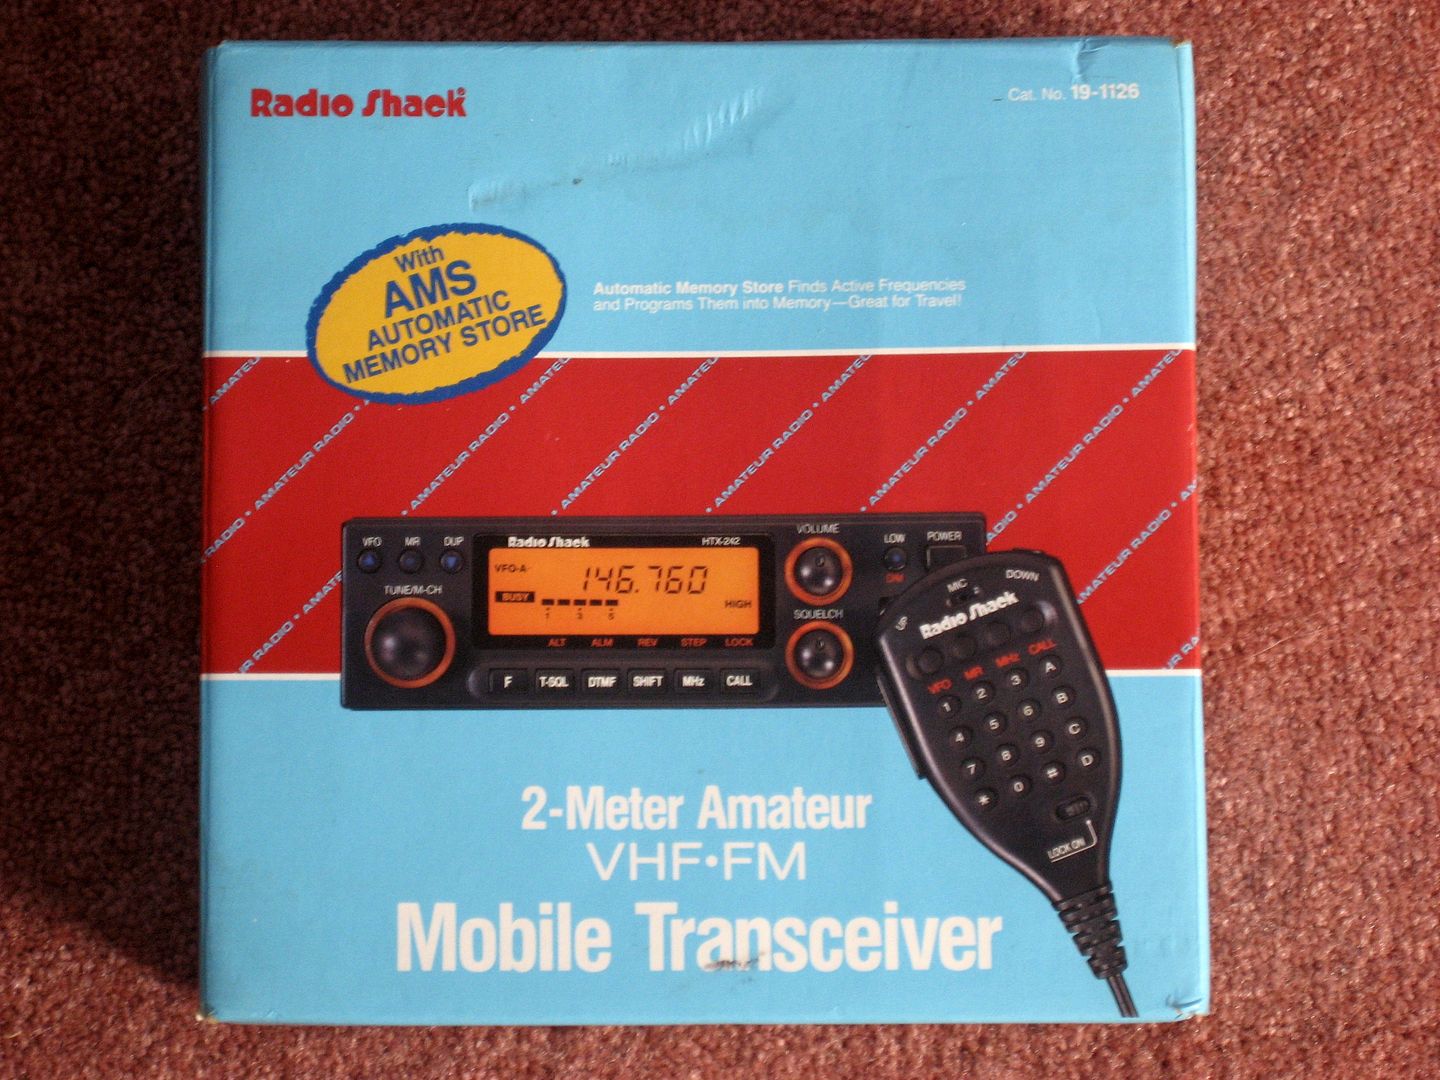 Ebay - how do I love thee? Let me count the ways. The first lesson to learn about Ham Radio is it can be an expensive habit! Thanks to eBay, I found an HTX-242 new in box (which is pretty cool, considering how old this radio probably is). 